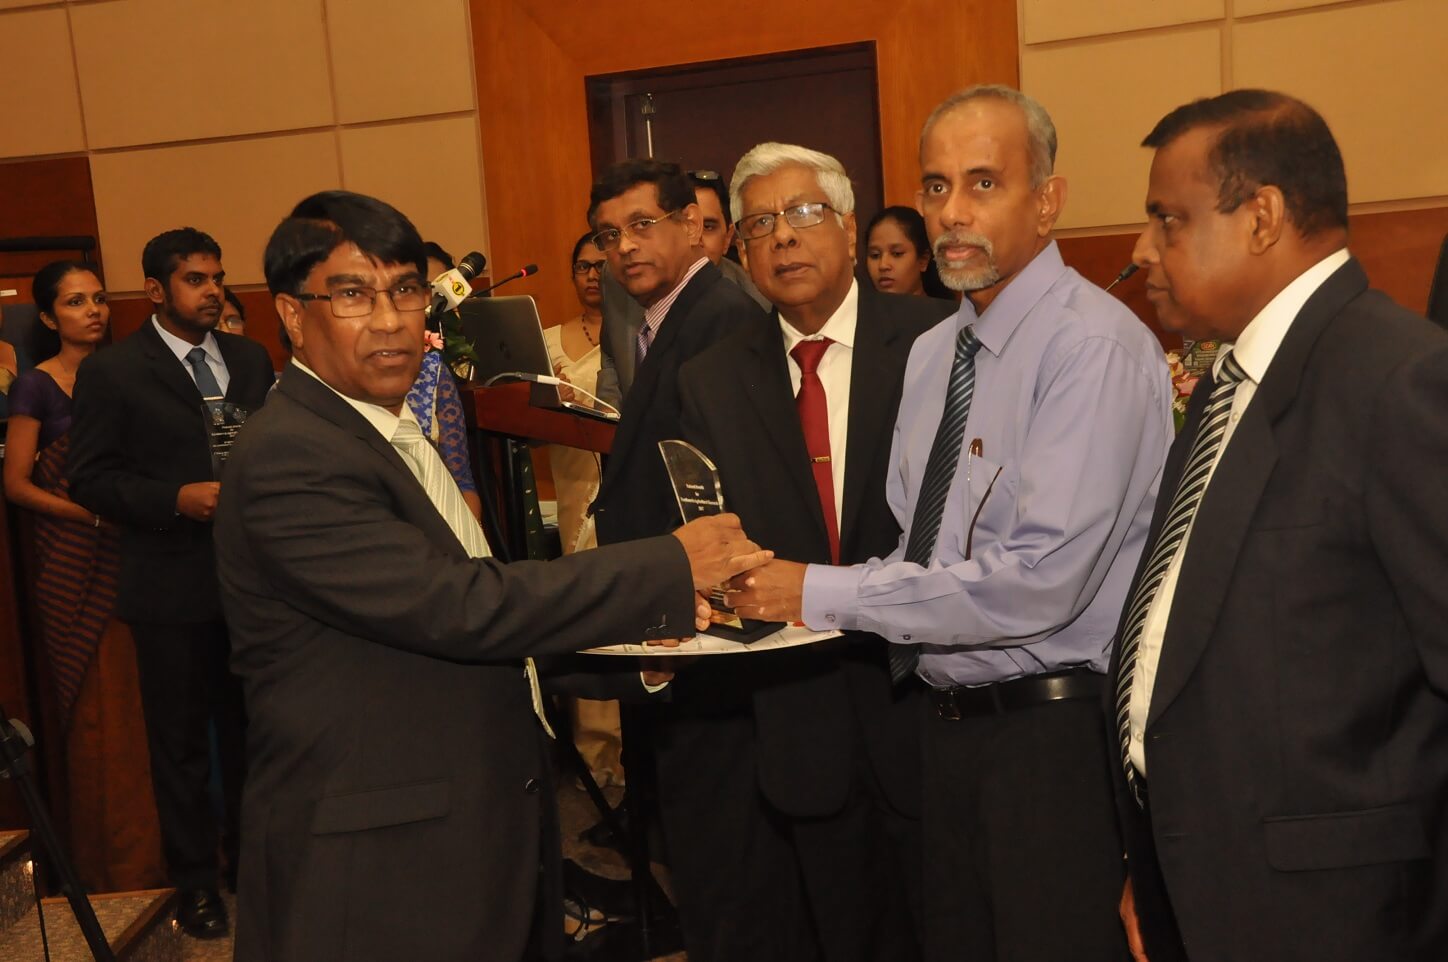 CIC wins the National award for the most Innovative Agriculture Research Work done in Sri Lanka